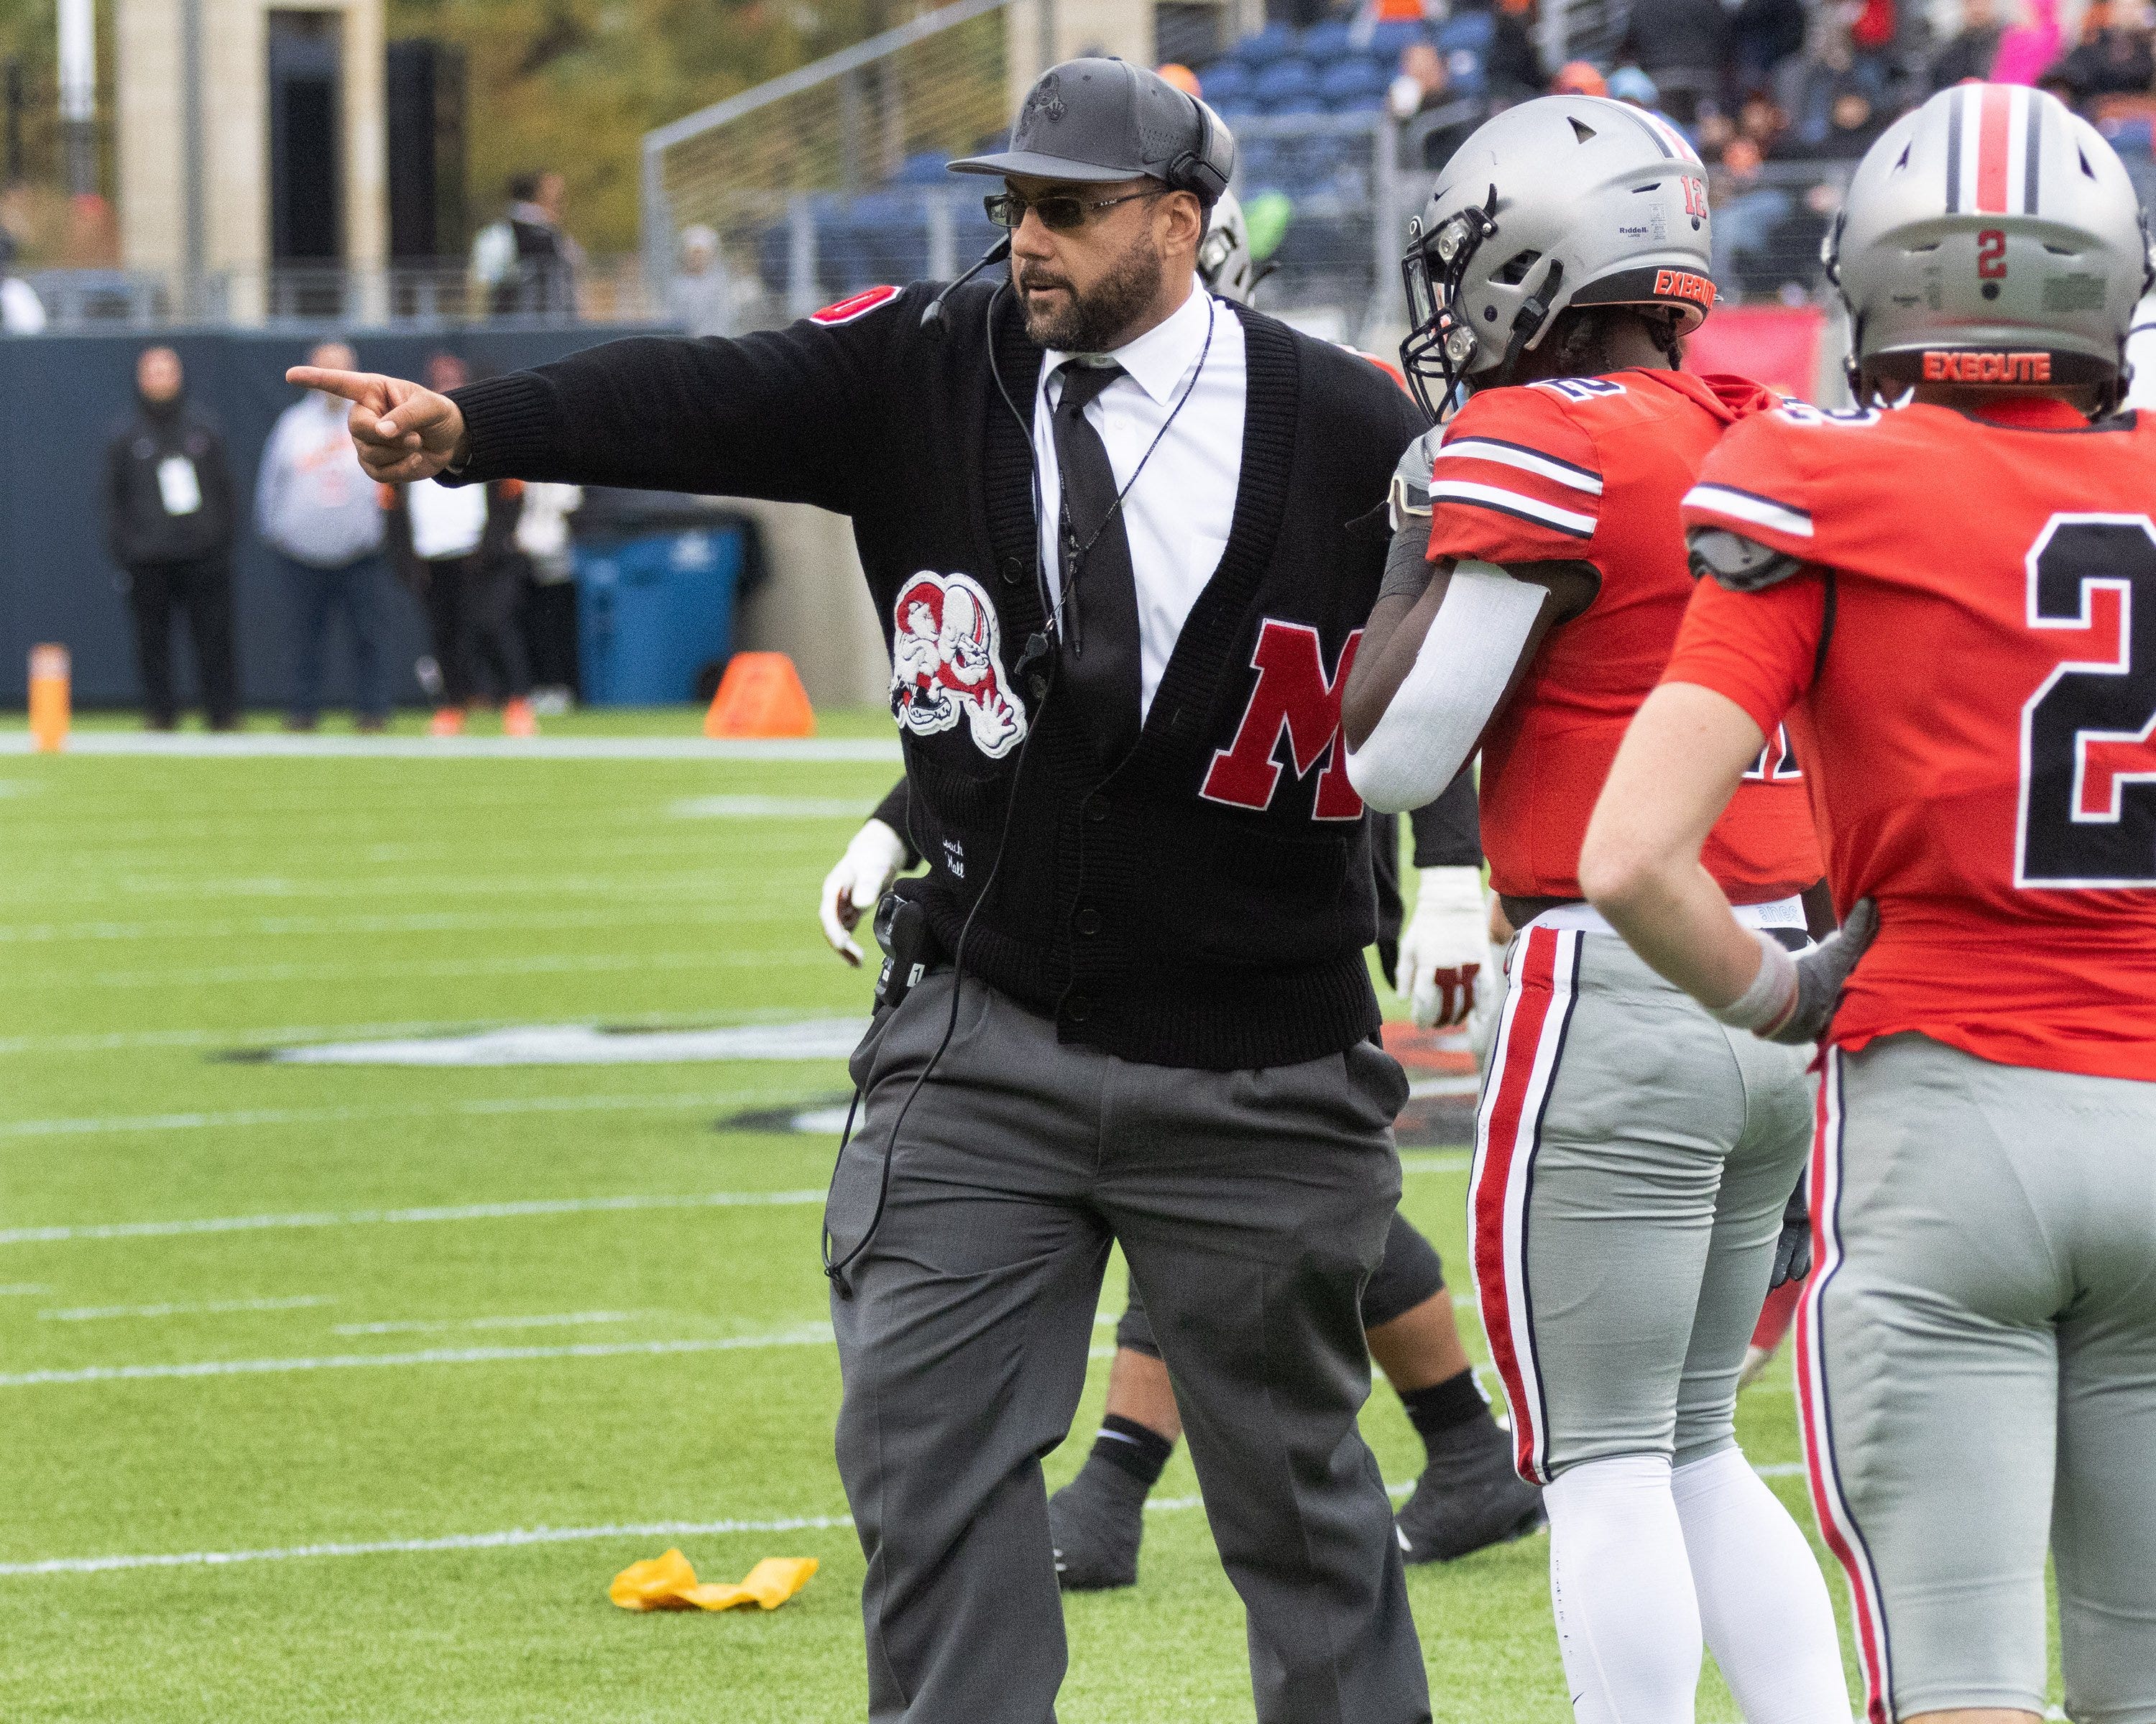 McKinley’s head coach Antonio Hall motions players to the sideline after multiple flags during the fourth quarter of their game against Massillon, Saturday, Oct. 21, 2023.